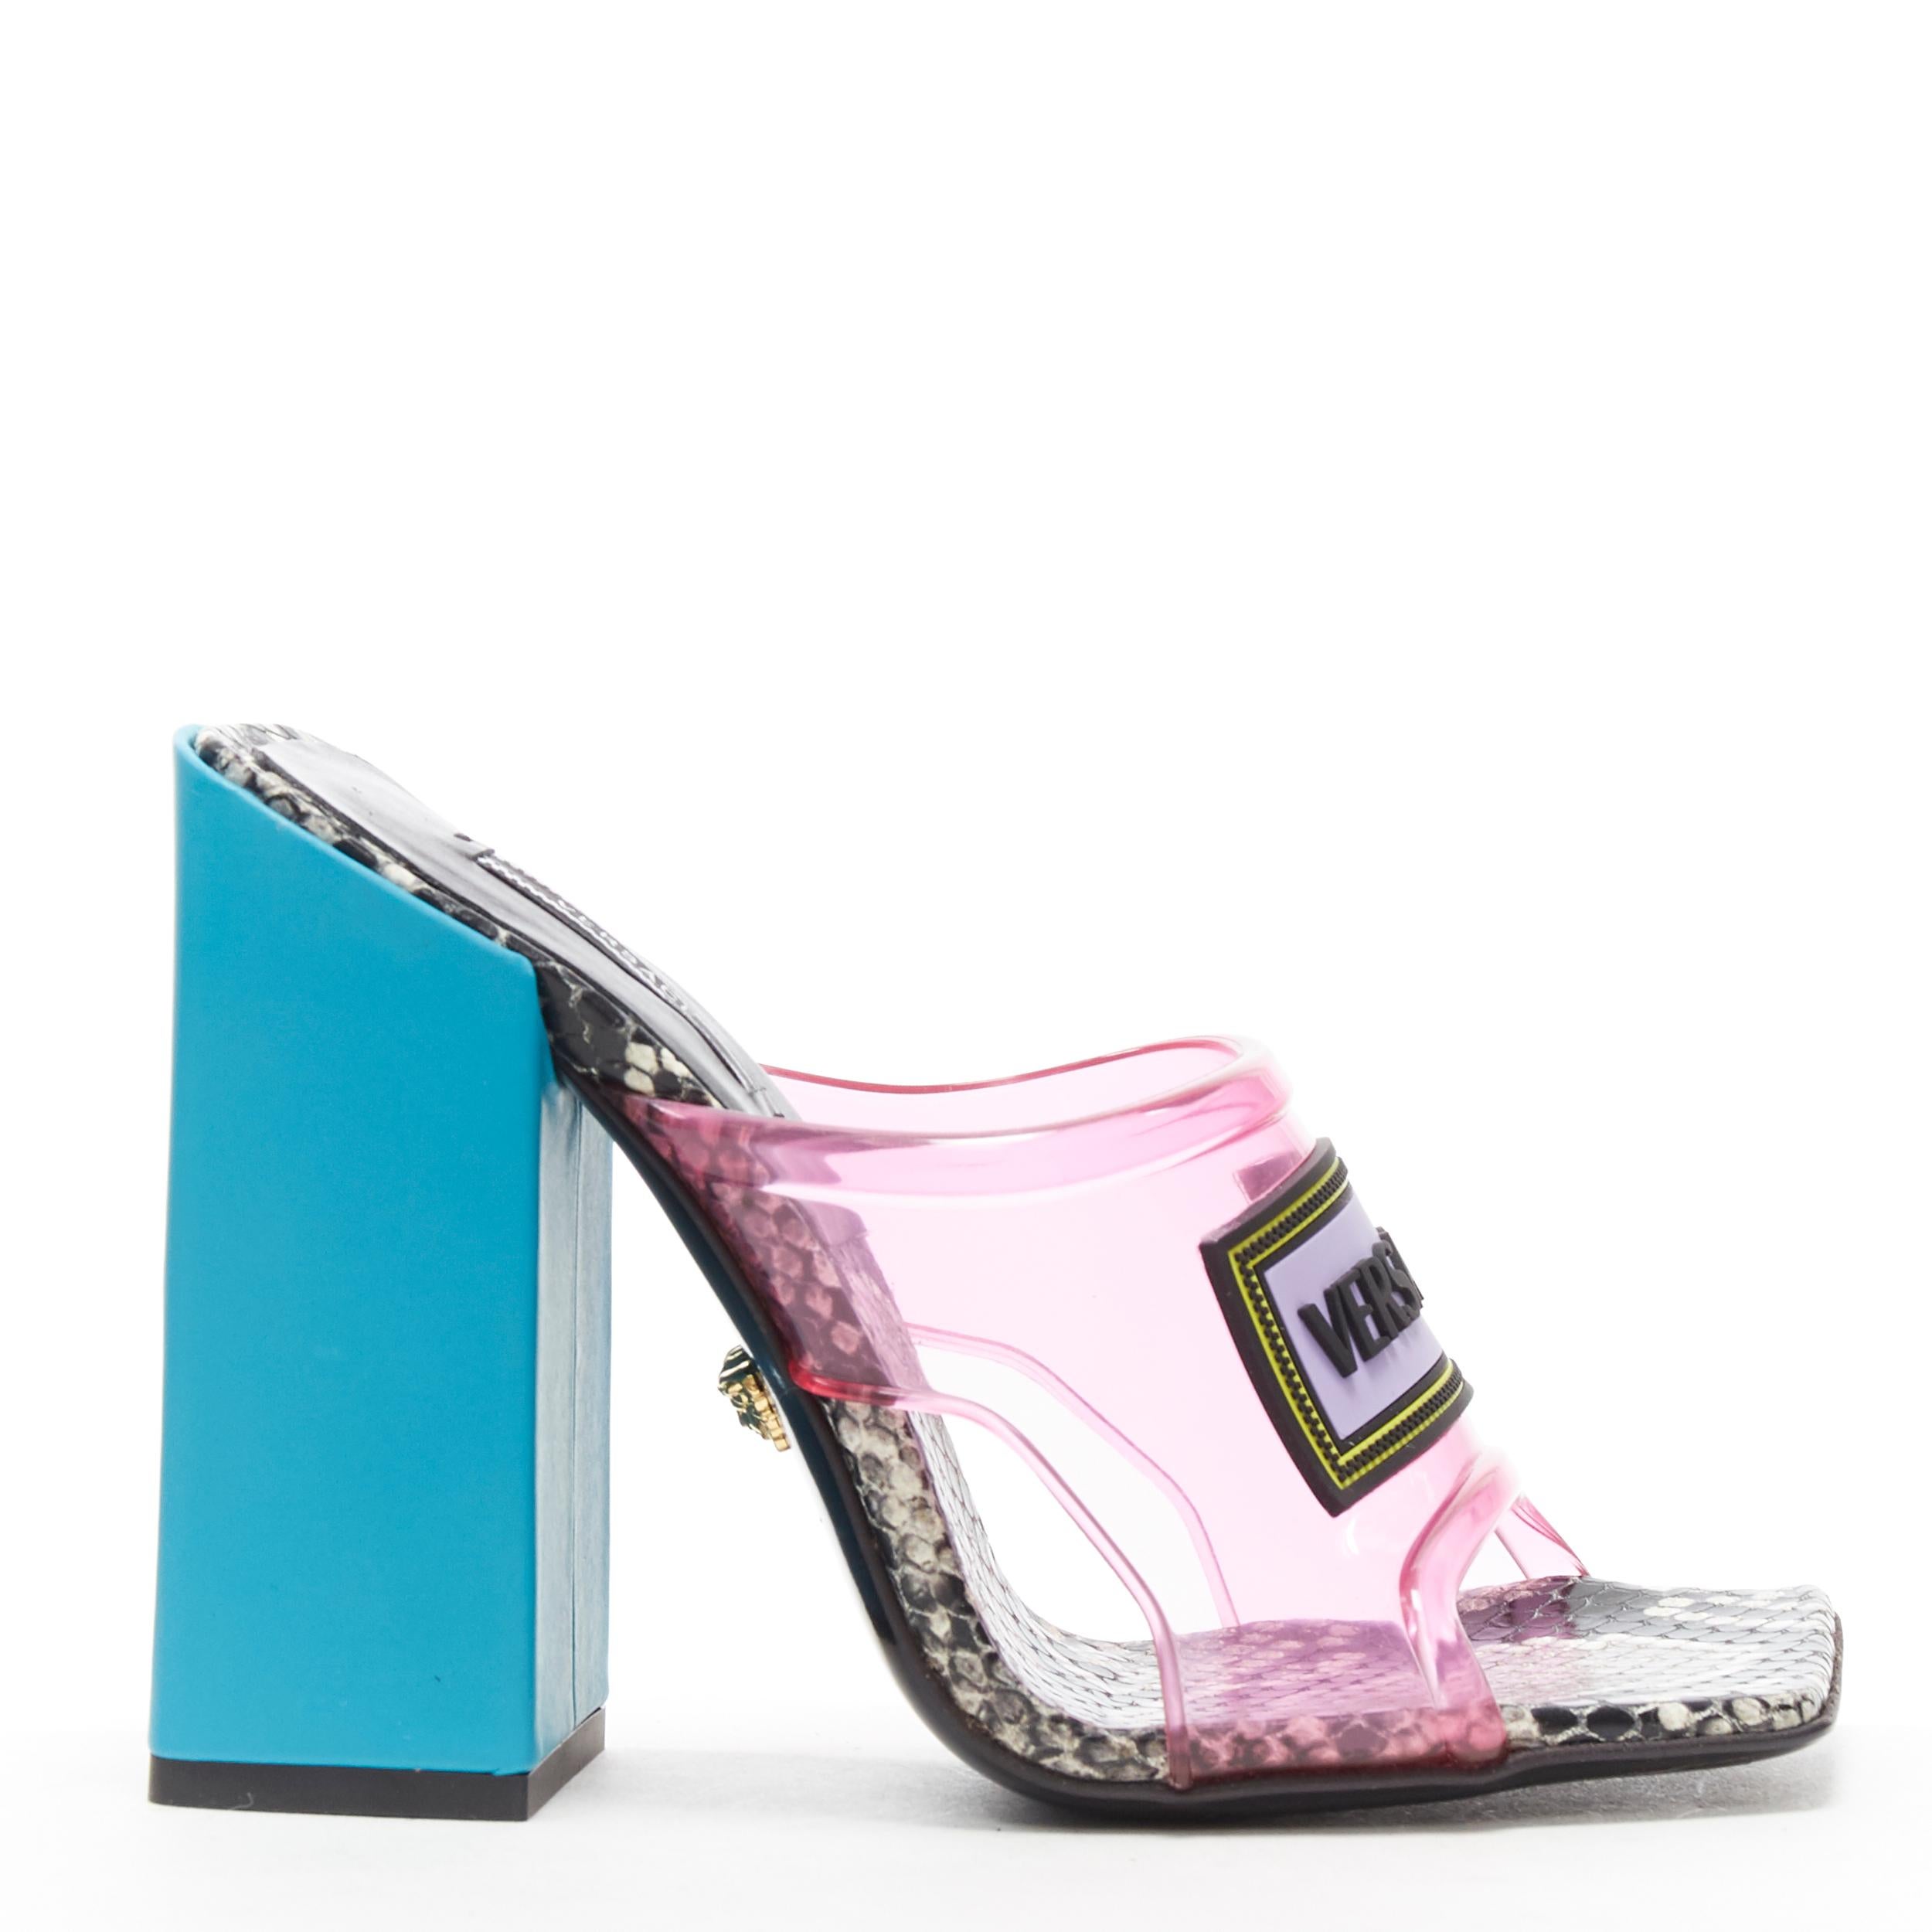 new VERSACE SS19 Runway pink PVC 90's logo square toe block high heel mule EU39
Brand: Versace
Designer: Donatella Versace
Collection: Spring Summer 2019
Model Name / Style: PVC Mule
Material: Rubber
Color: Pink
Pattern: Solid
Closure: Slip on
Extra